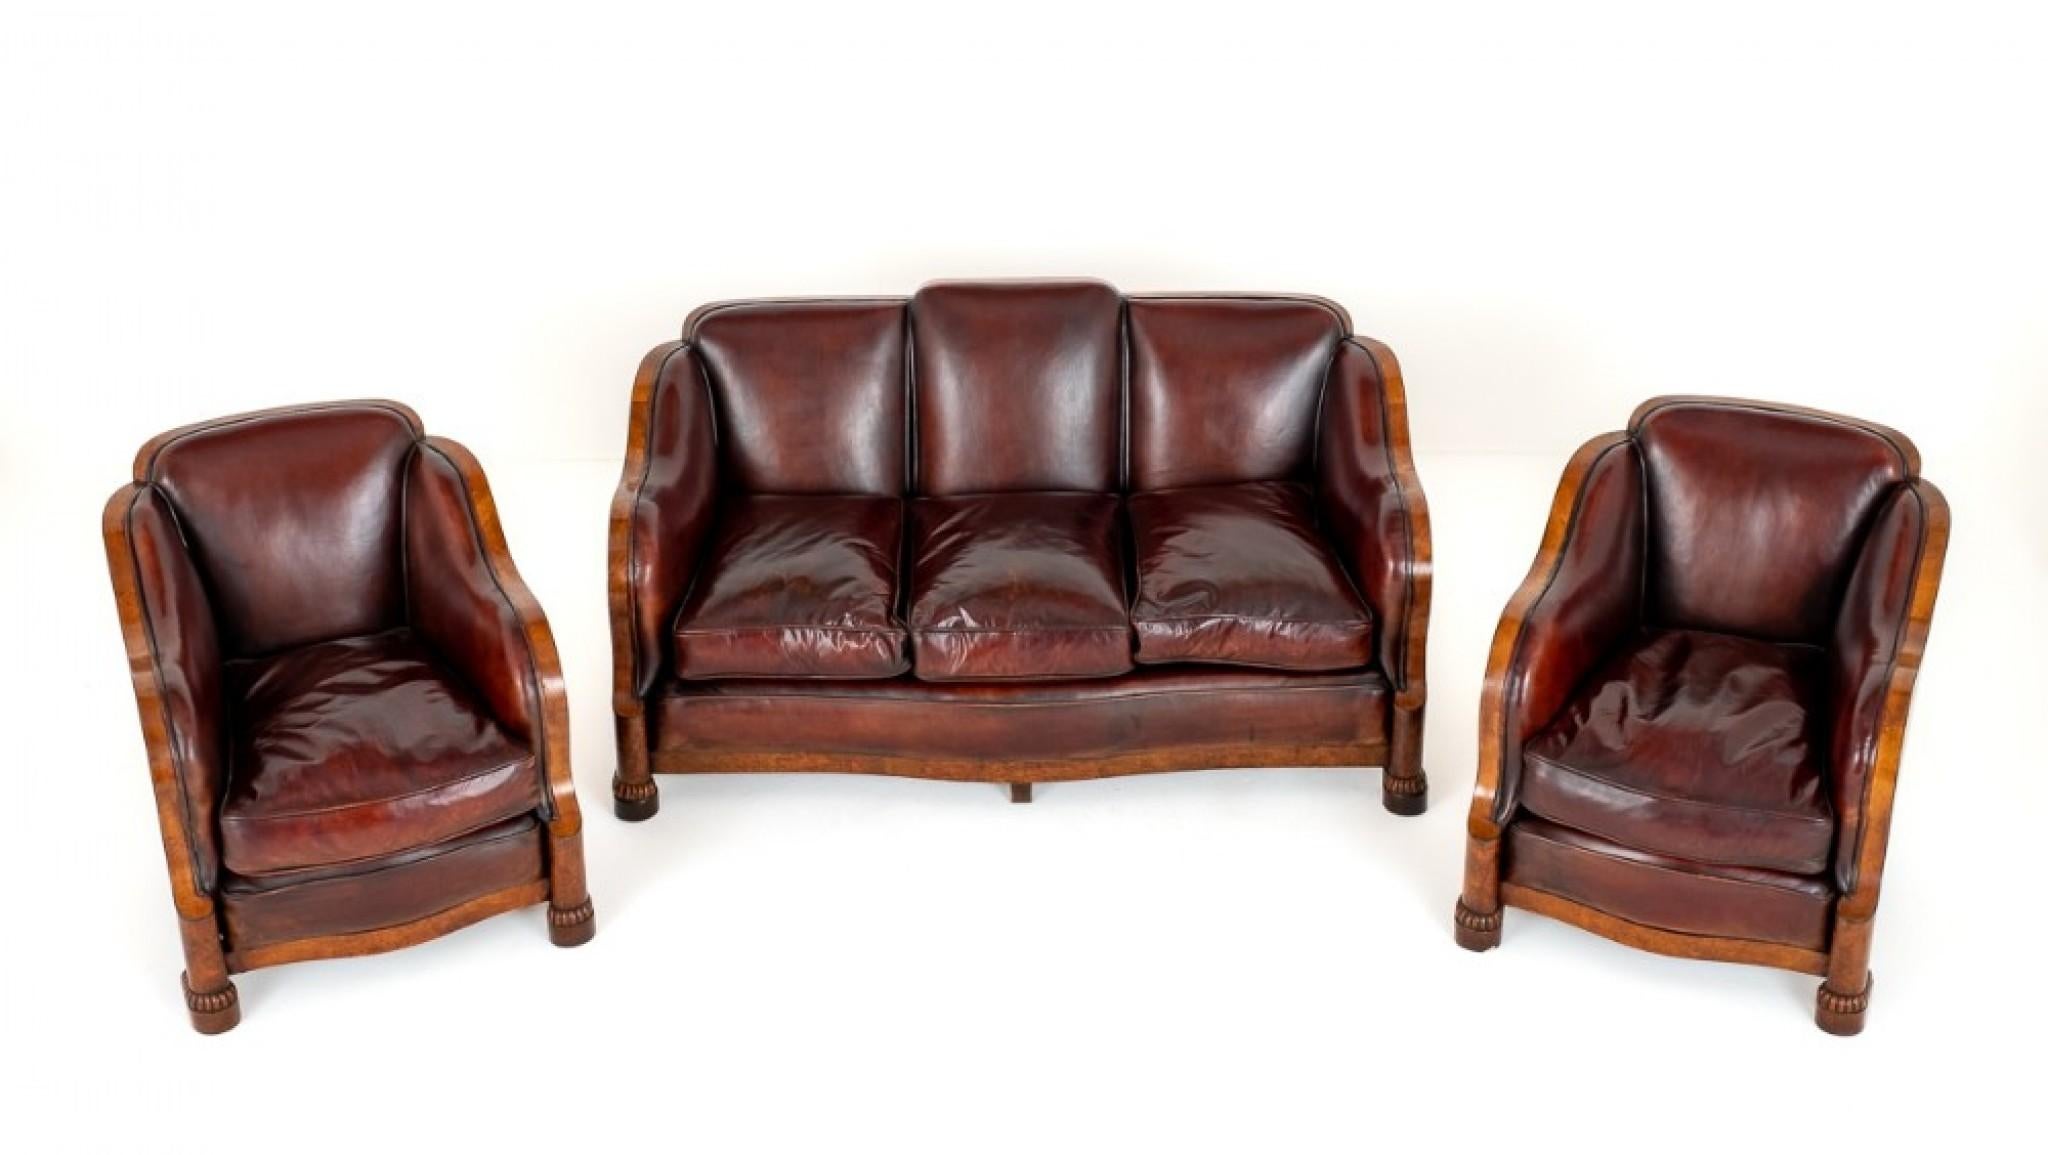 Mid-20th Century Art Deco Cloud Suite Club Chairs Couch Period, 1930 For Sale